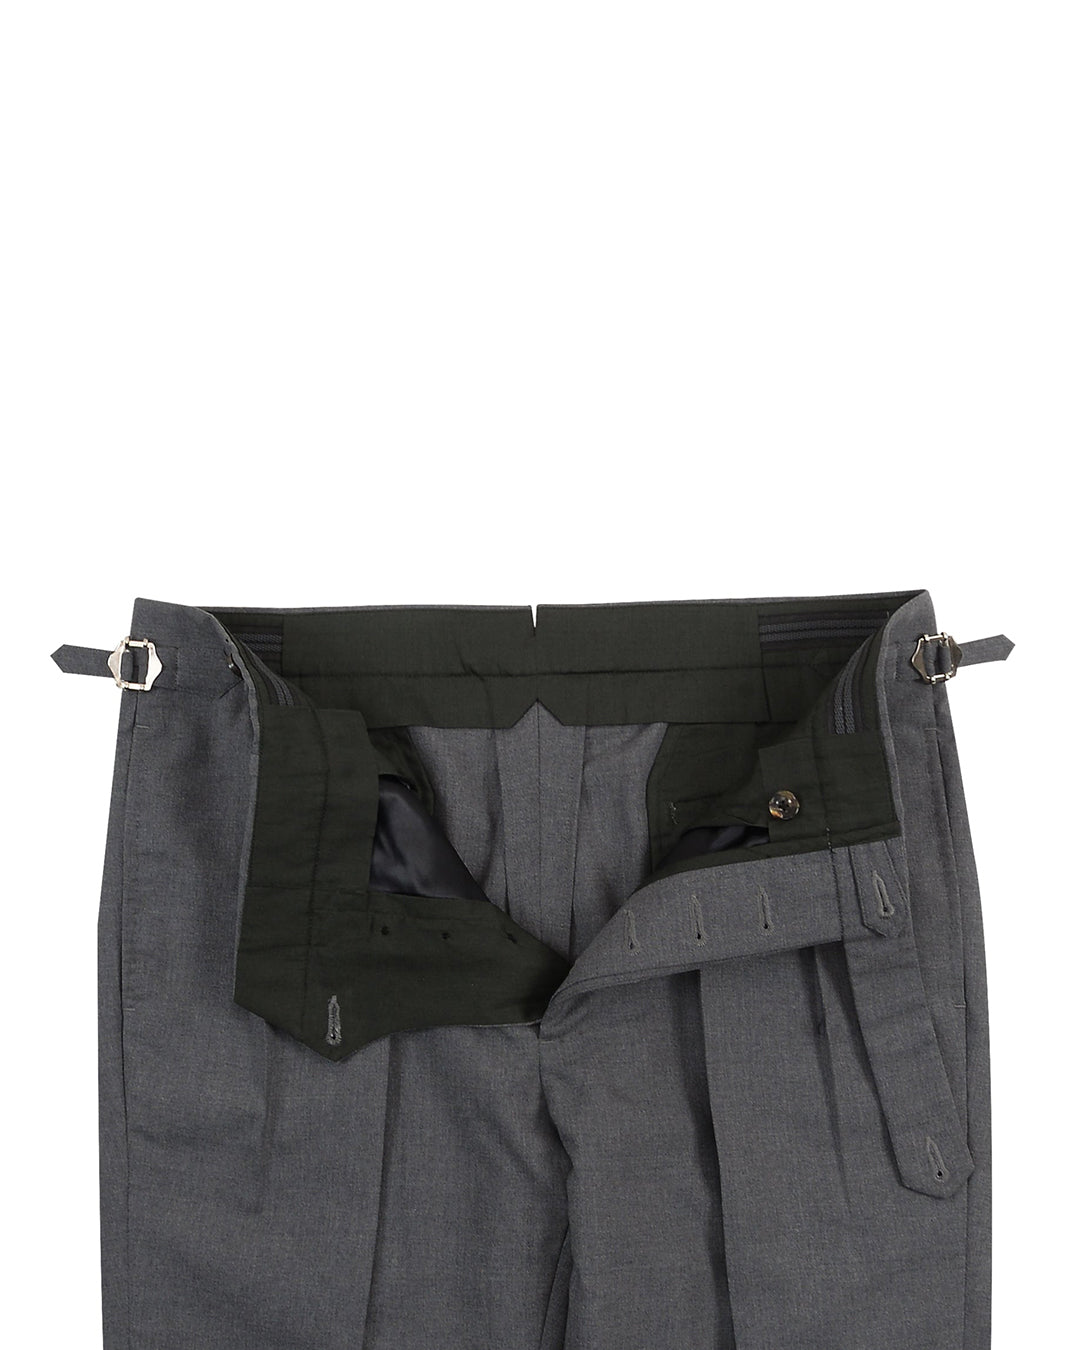 Dugdale New Fine Worsted Tropical Wool - Grey High Waisted Pant